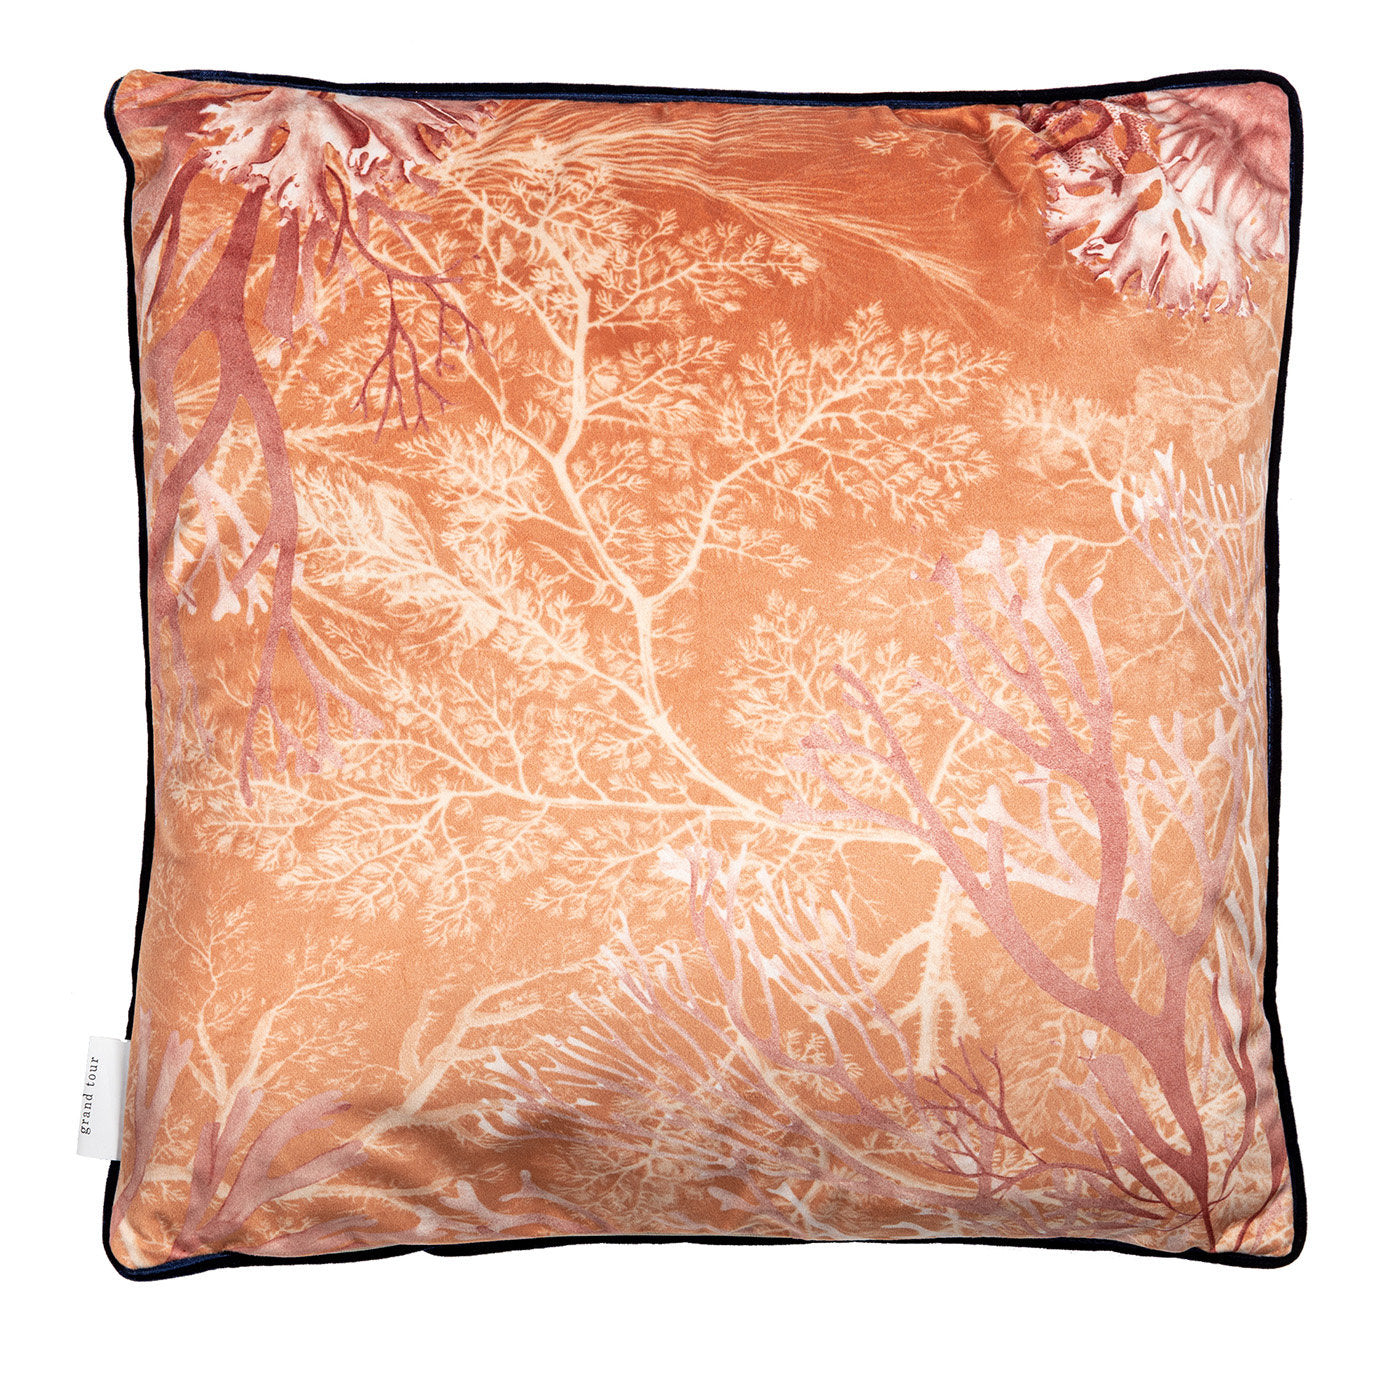 Amami Islands Velvet Cushion With Tropical Fish #5 - Alternative view 1